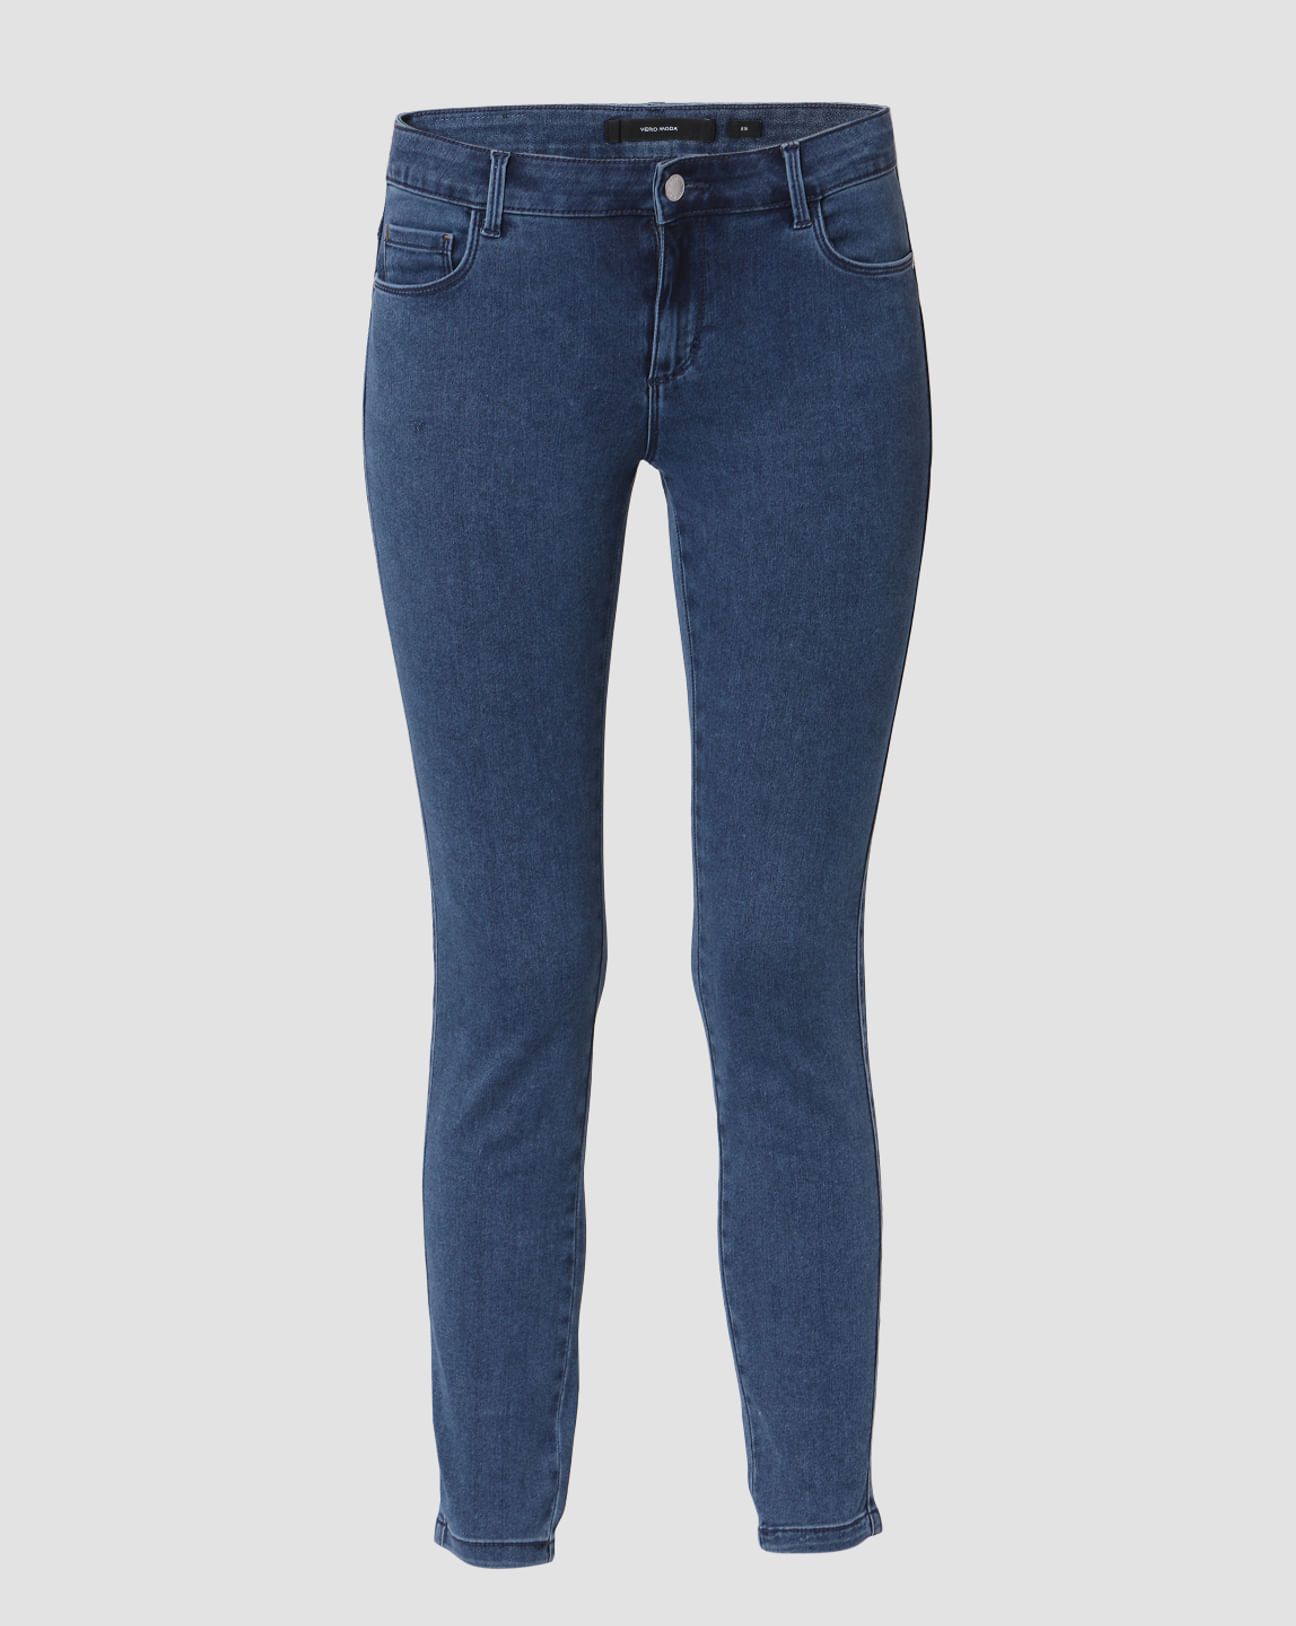 Buy Perfect Blue Mid Rise Jeggings Online In India.